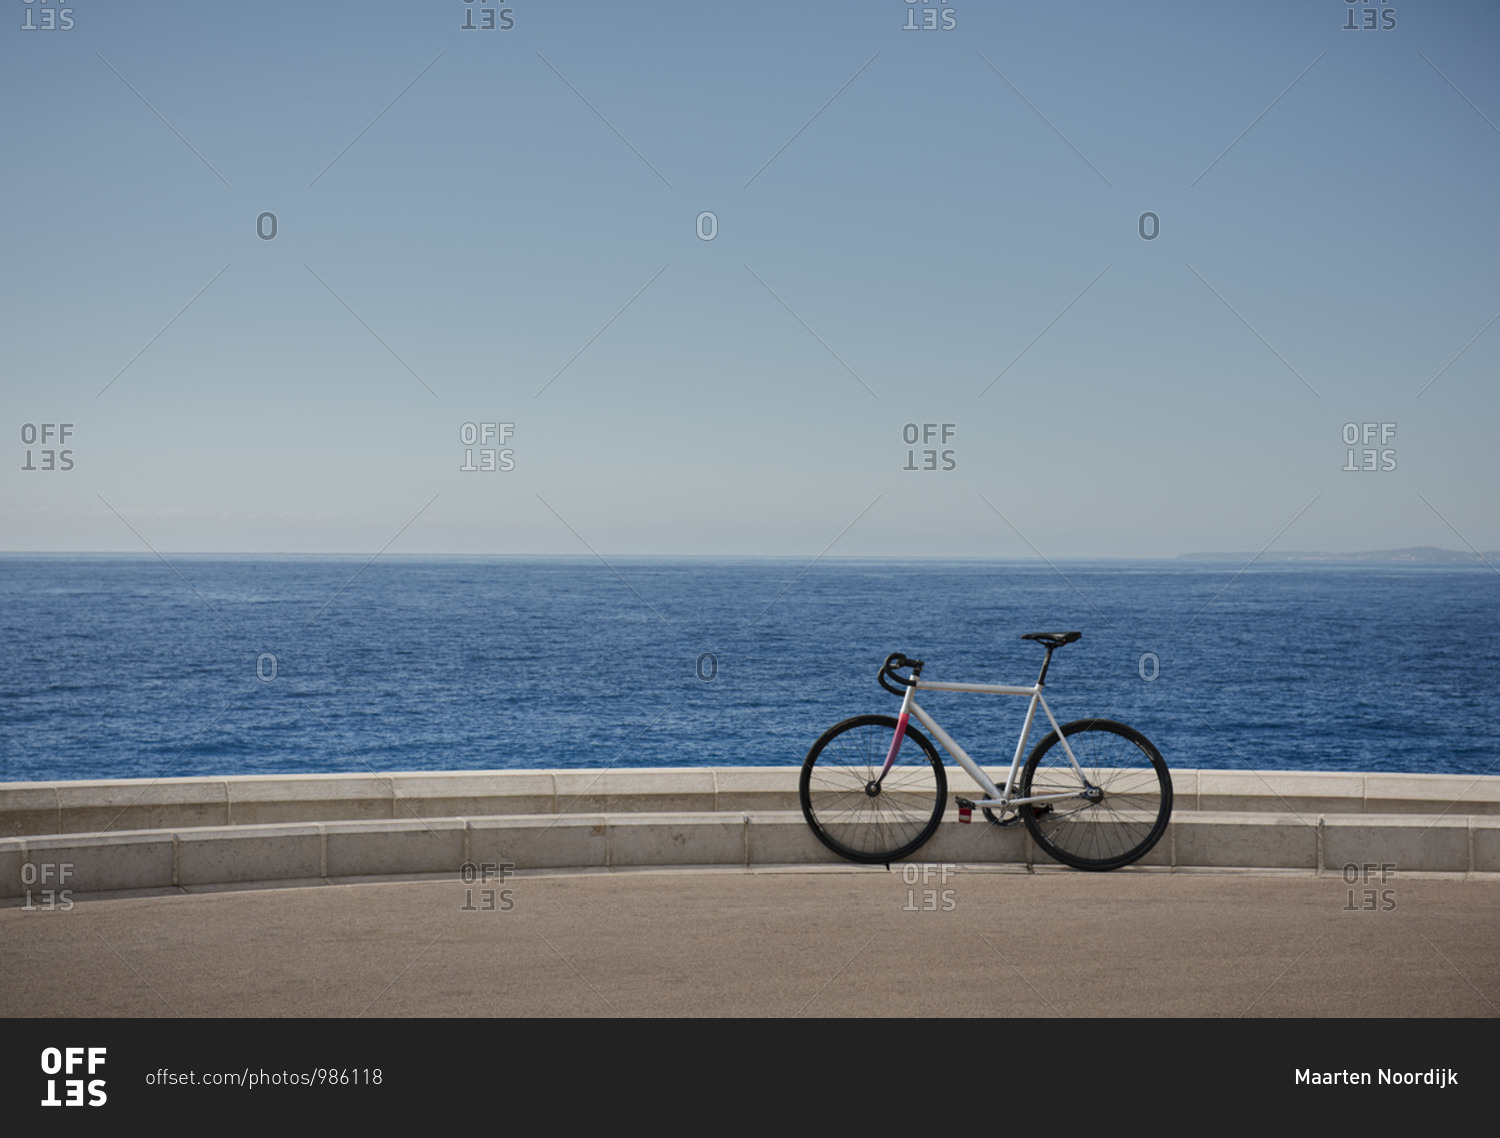 The waters of the Mediterranean sea and a bike resting on the promenade in the city of Nice on the d'Azur in France.